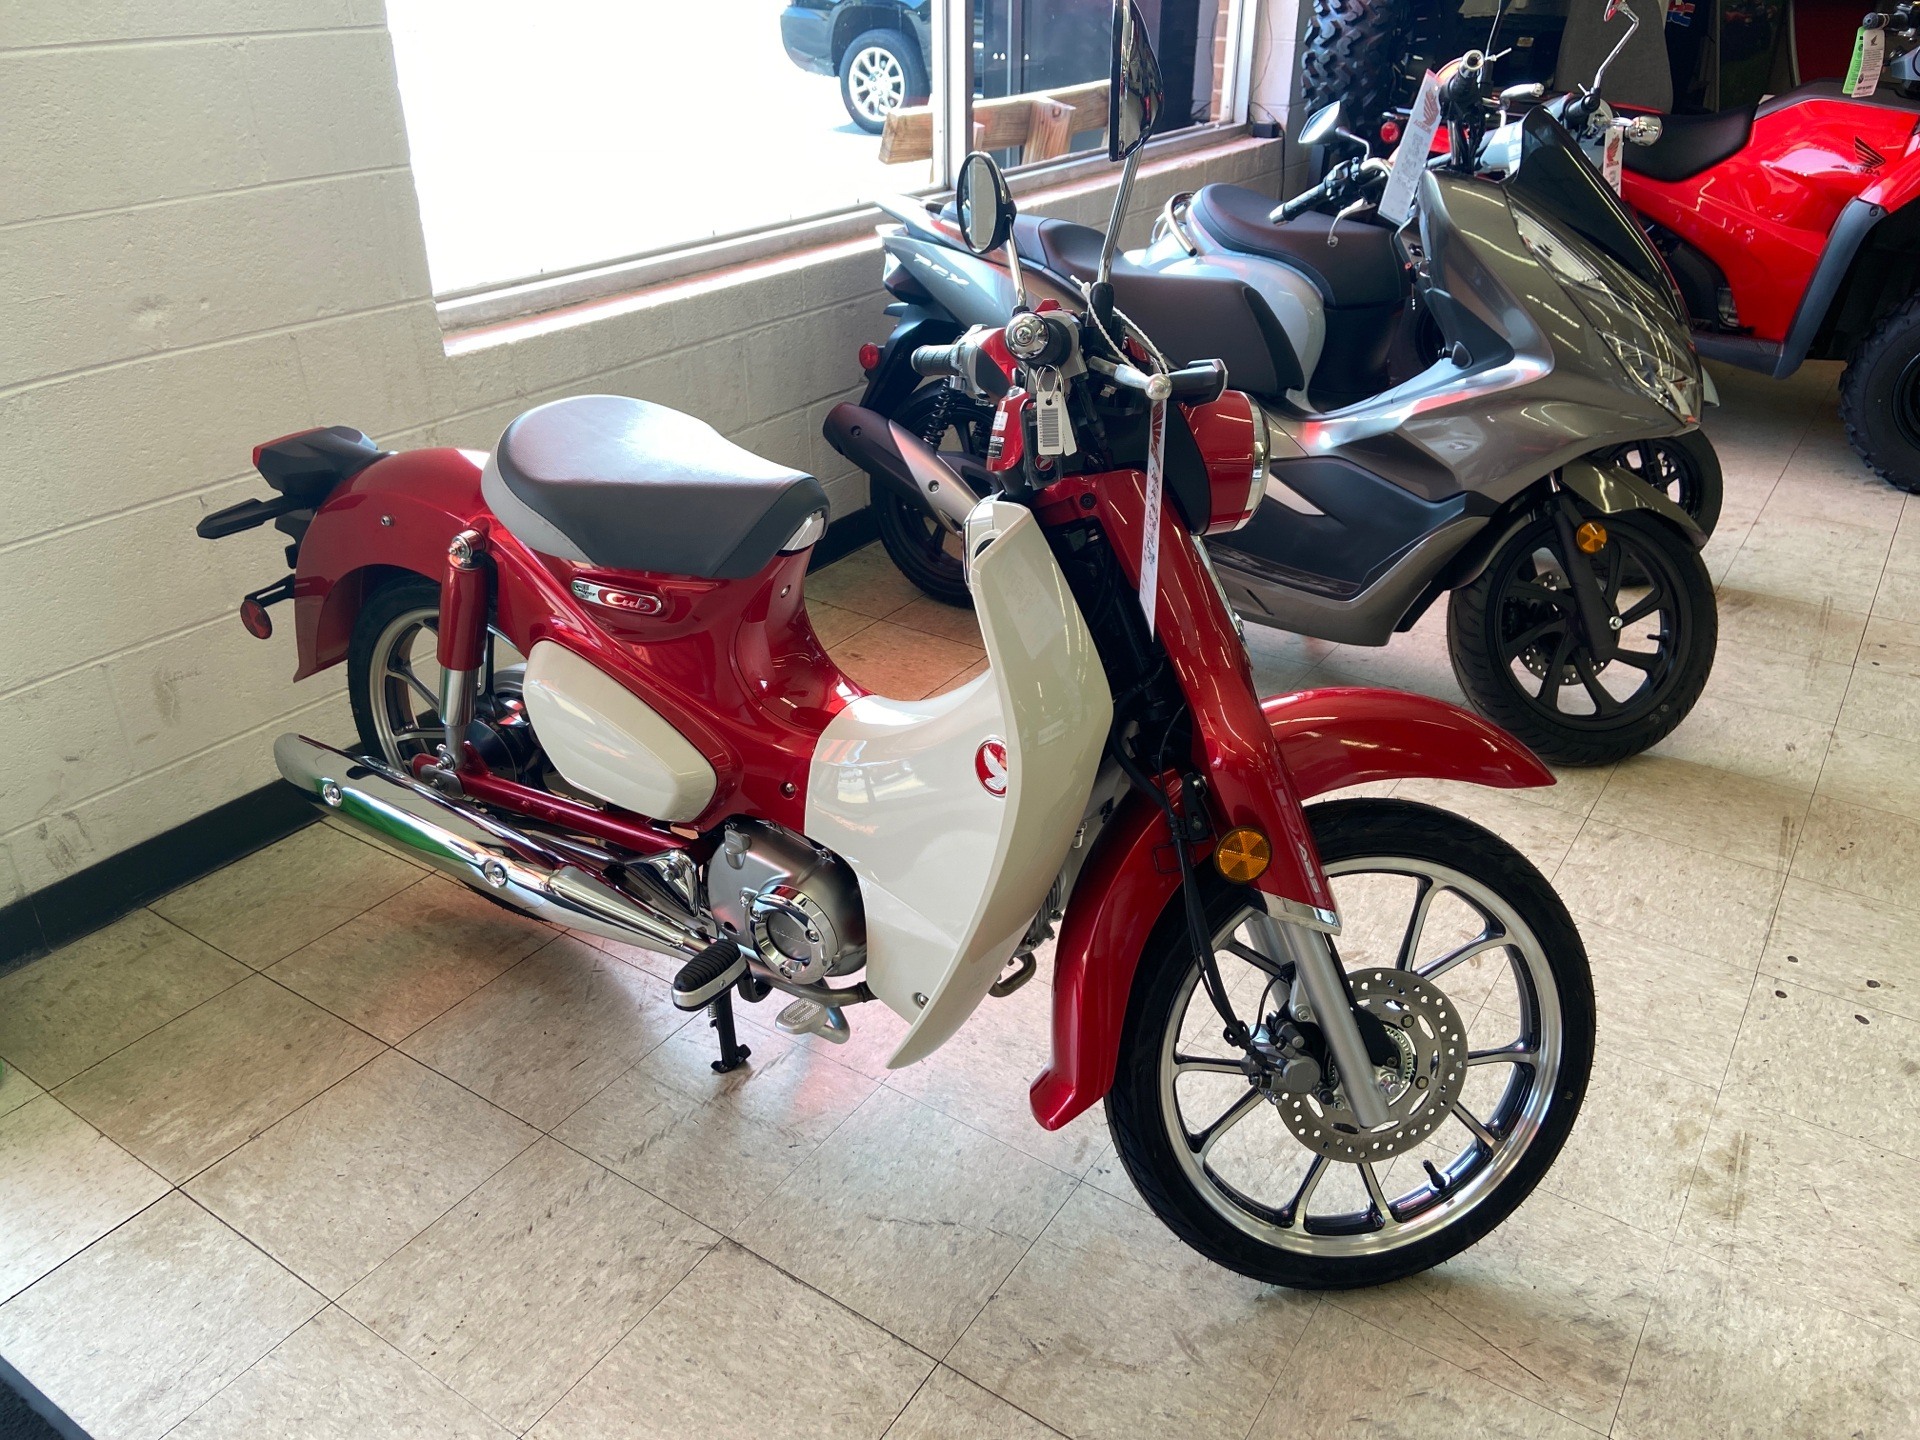 New 2021 Honda Super Cub C125 Abs Motorcycles In Greeneville Tn Stock Number 200092